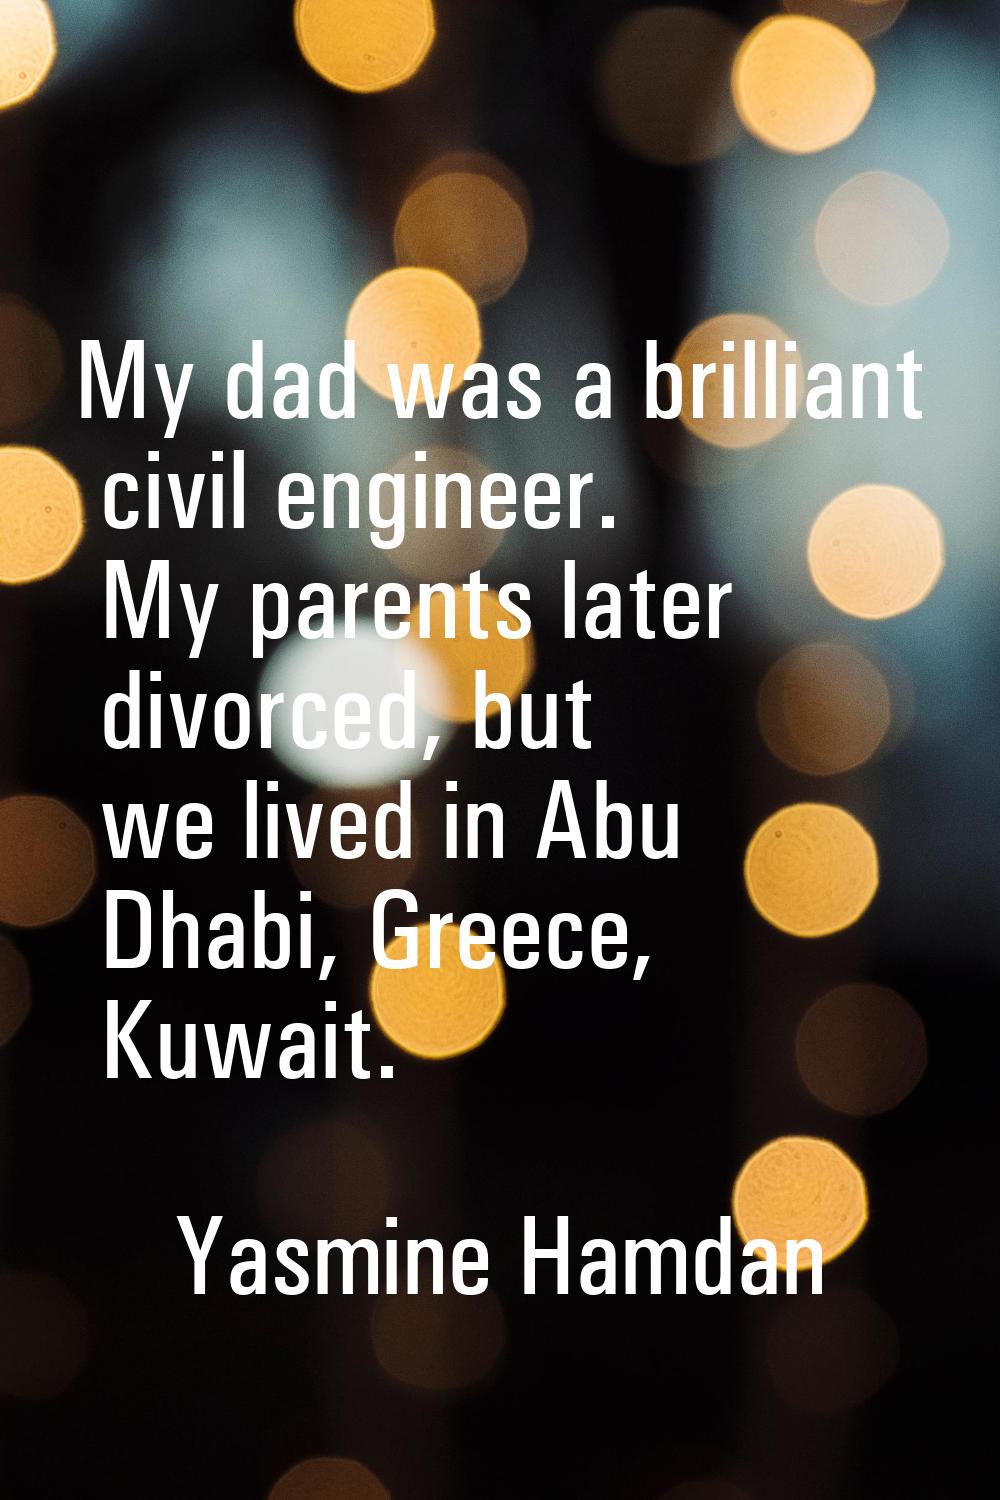 My dad was a brilliant civil engineer. My parents later divorced, but we lived in Abu Dhabi, Greece